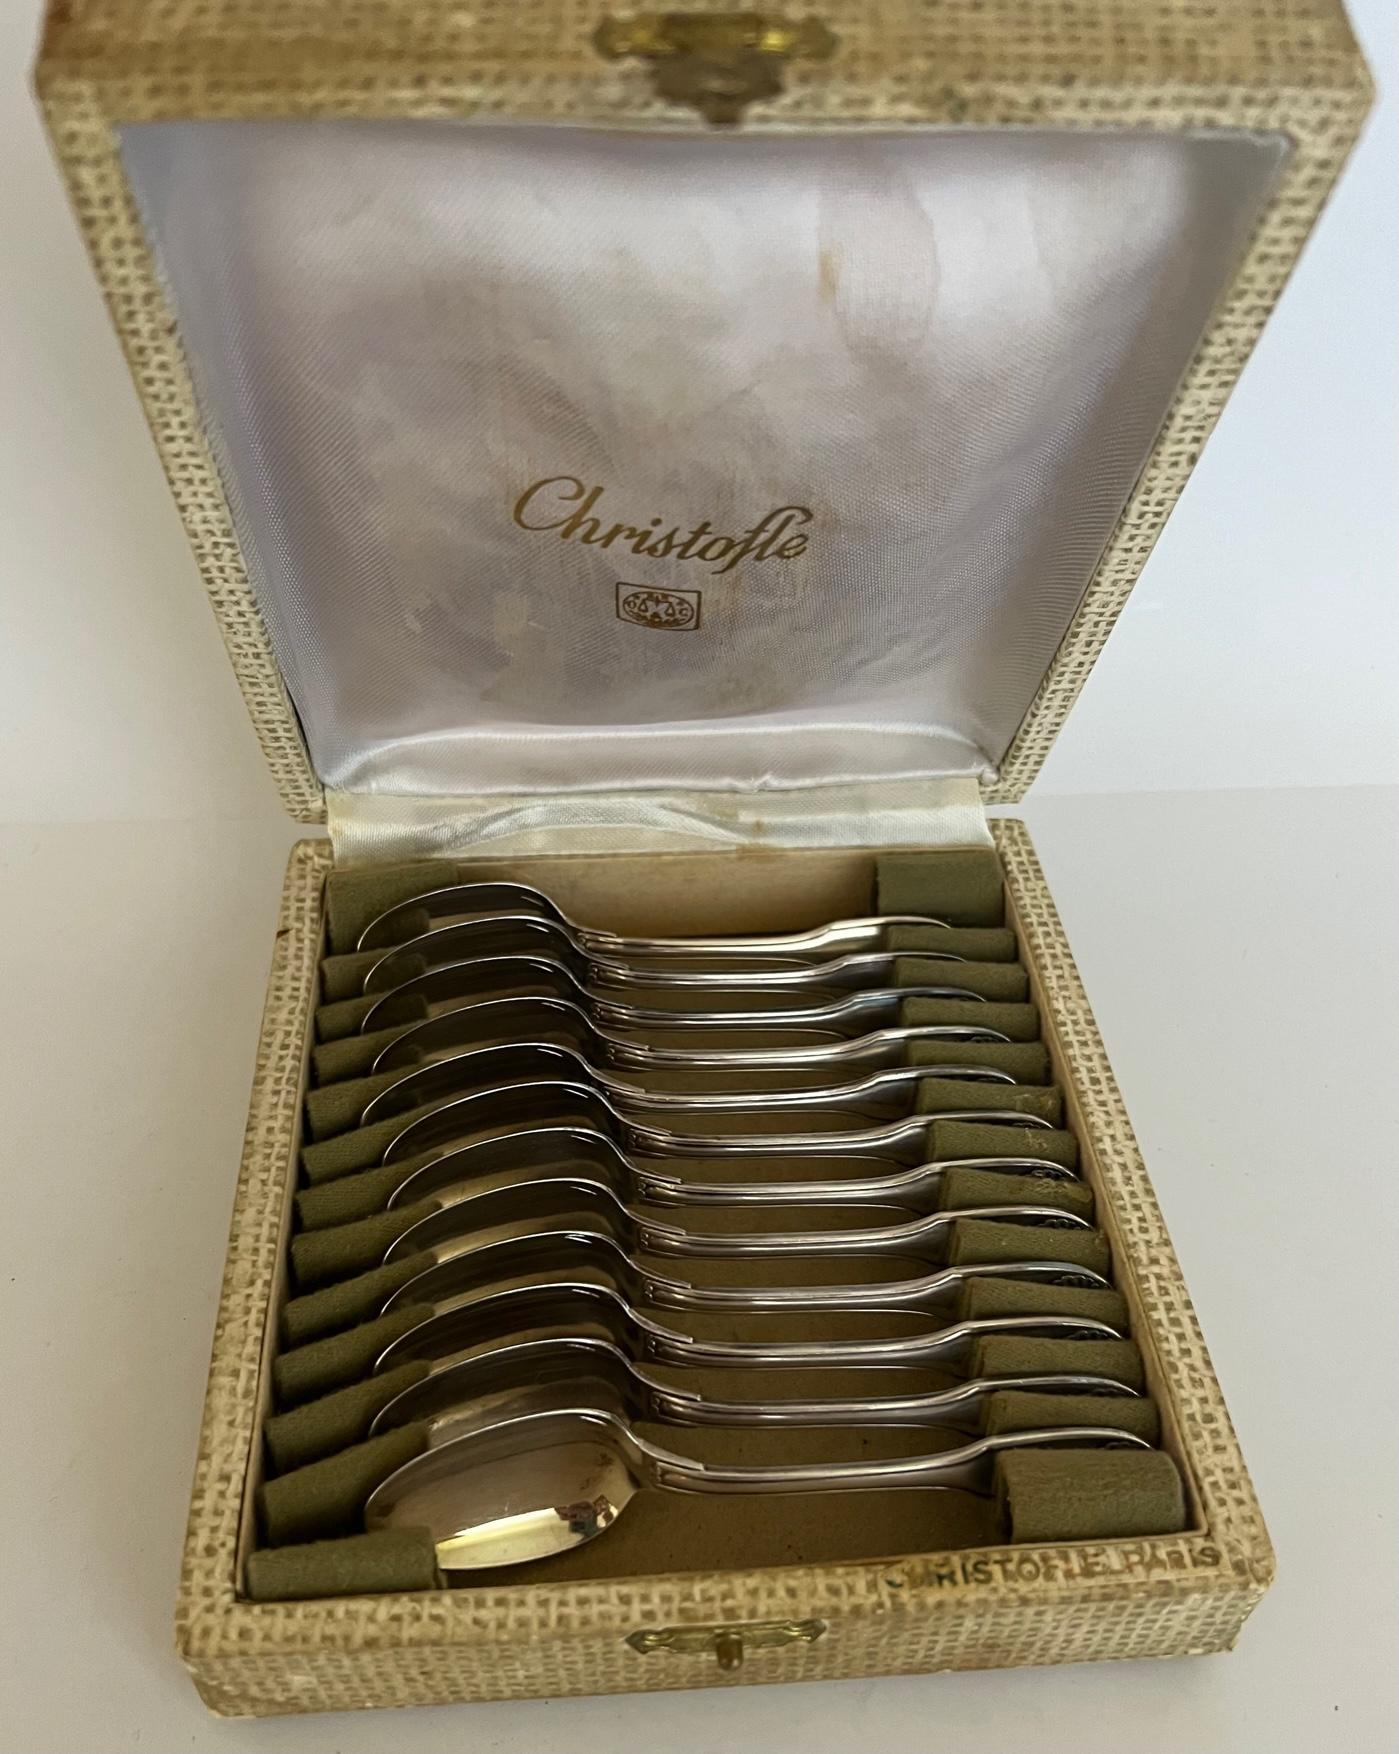 Christofle Demitasse Spoons in Vendome Pattern in Box- Set of 12 For Sale 1